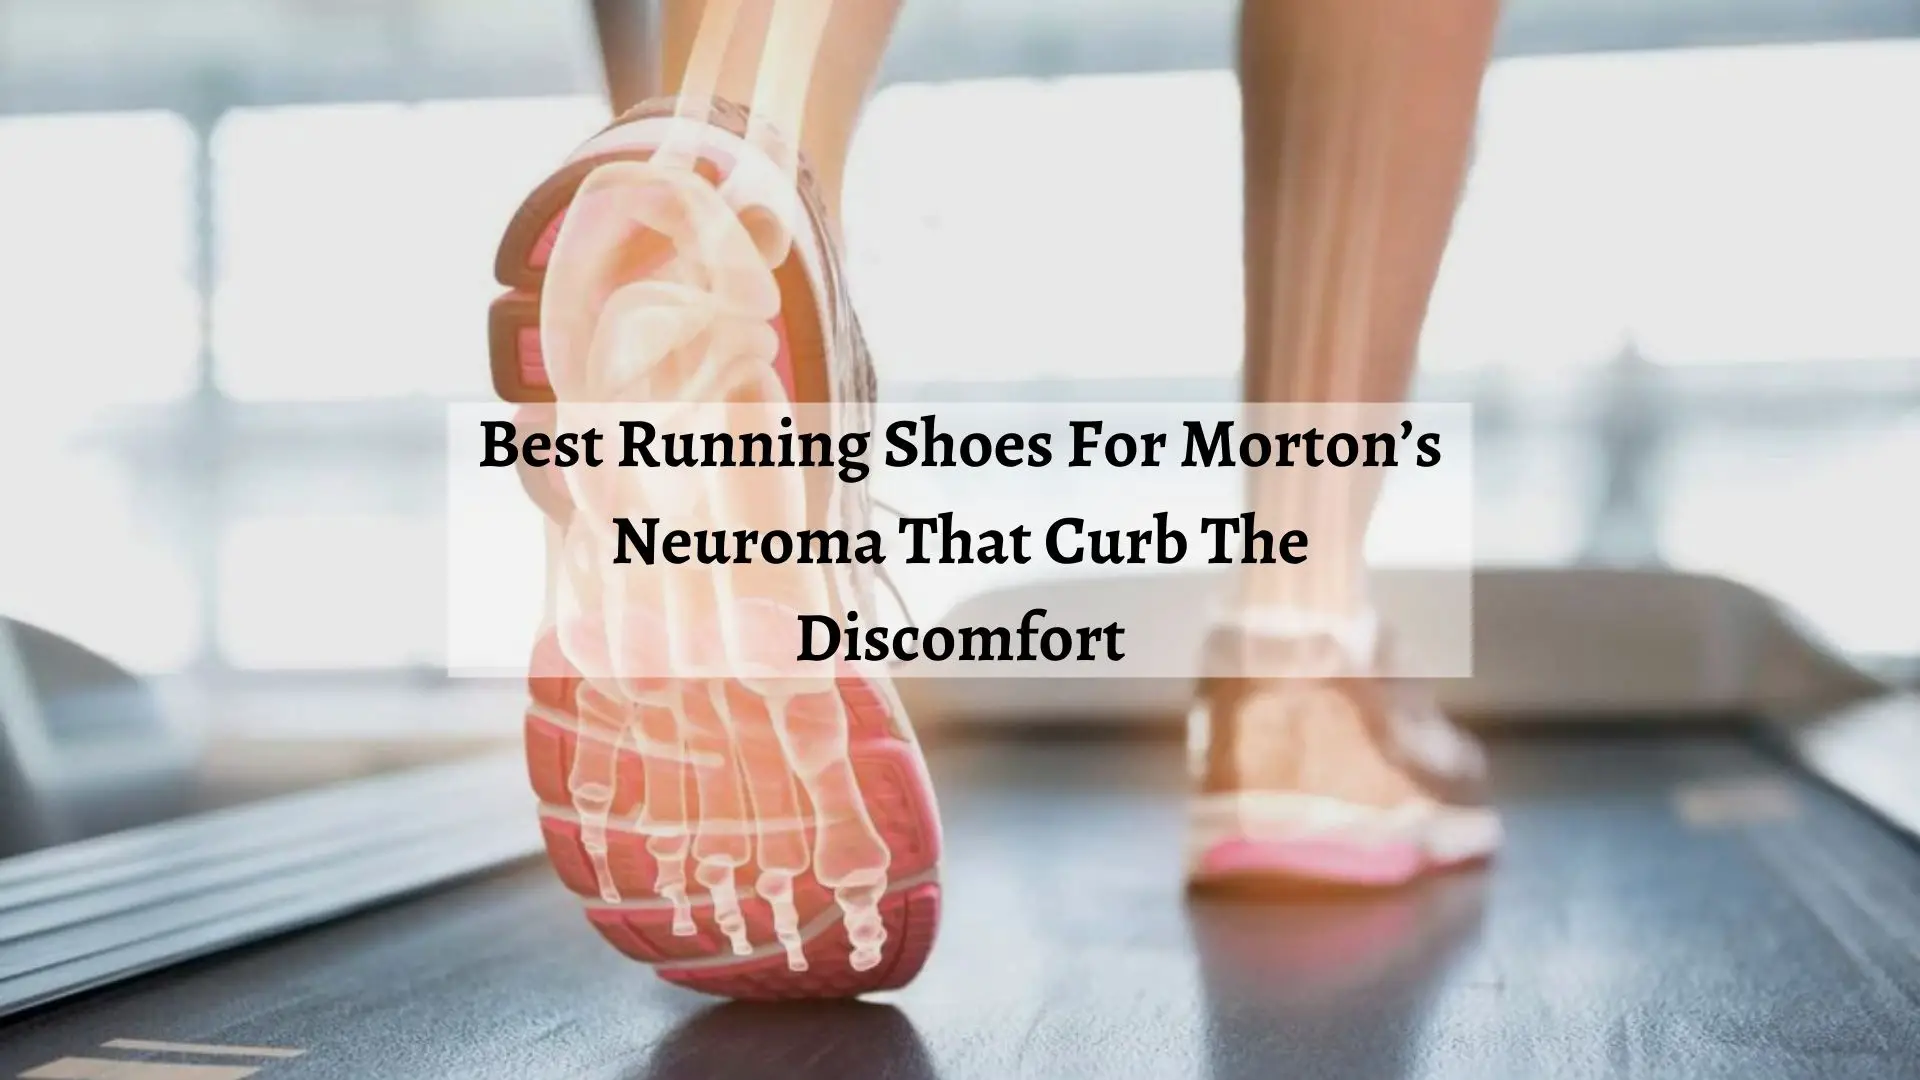 8 Best Running Shoes For Morton’s Toe/Neuroma That Curb The Shoe Filter